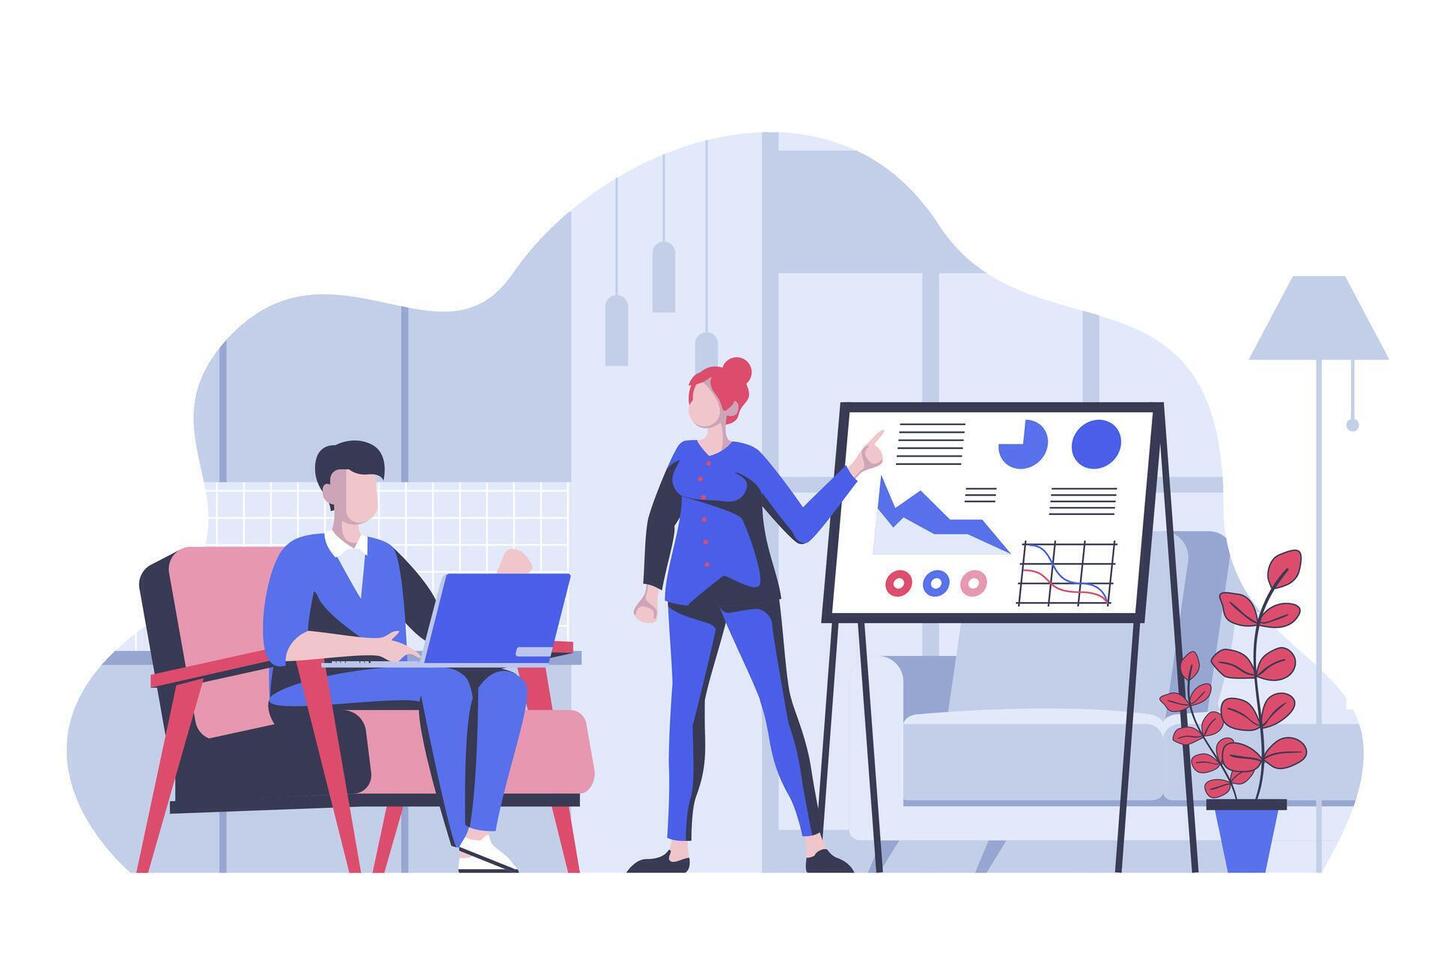 Business meeting concept with cartoon people in flat design for web. Colleagues analyzing and discussing presentation at conference. Vector illustration for social media banner, marketing material.